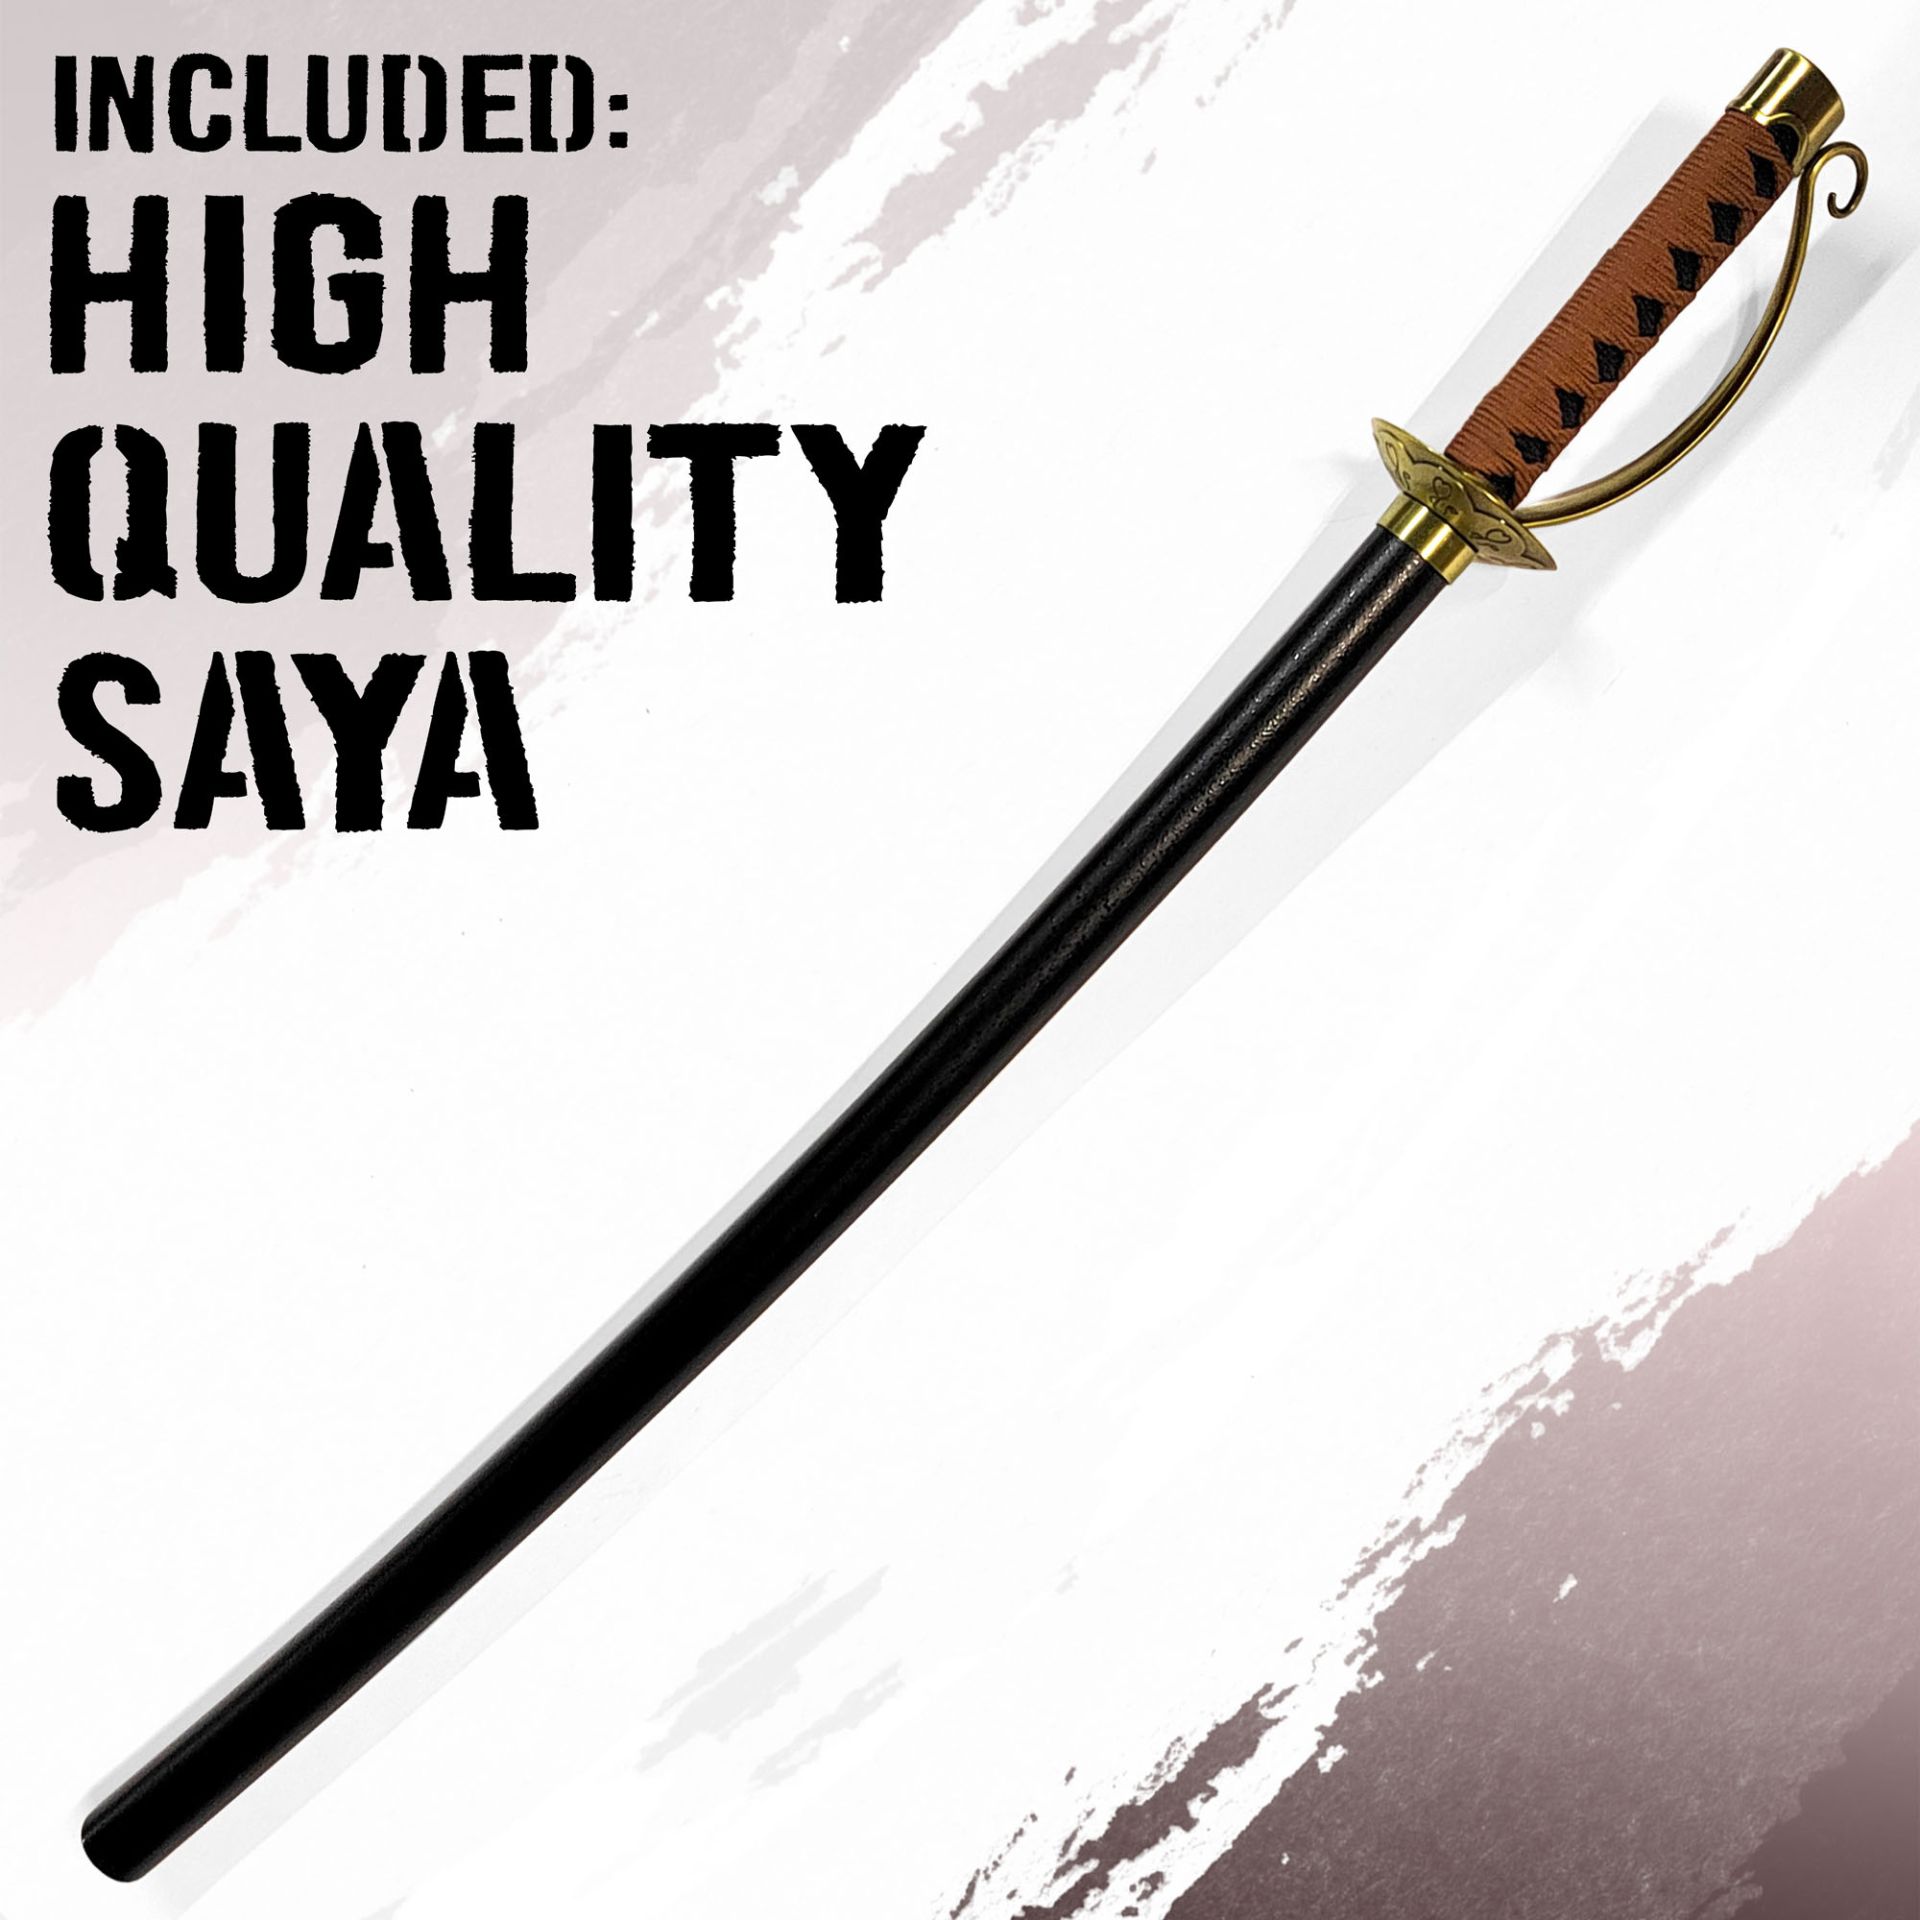 One Piece - Gol D Roger - Ace Sword with Sheath (Golden Handle) Handforged